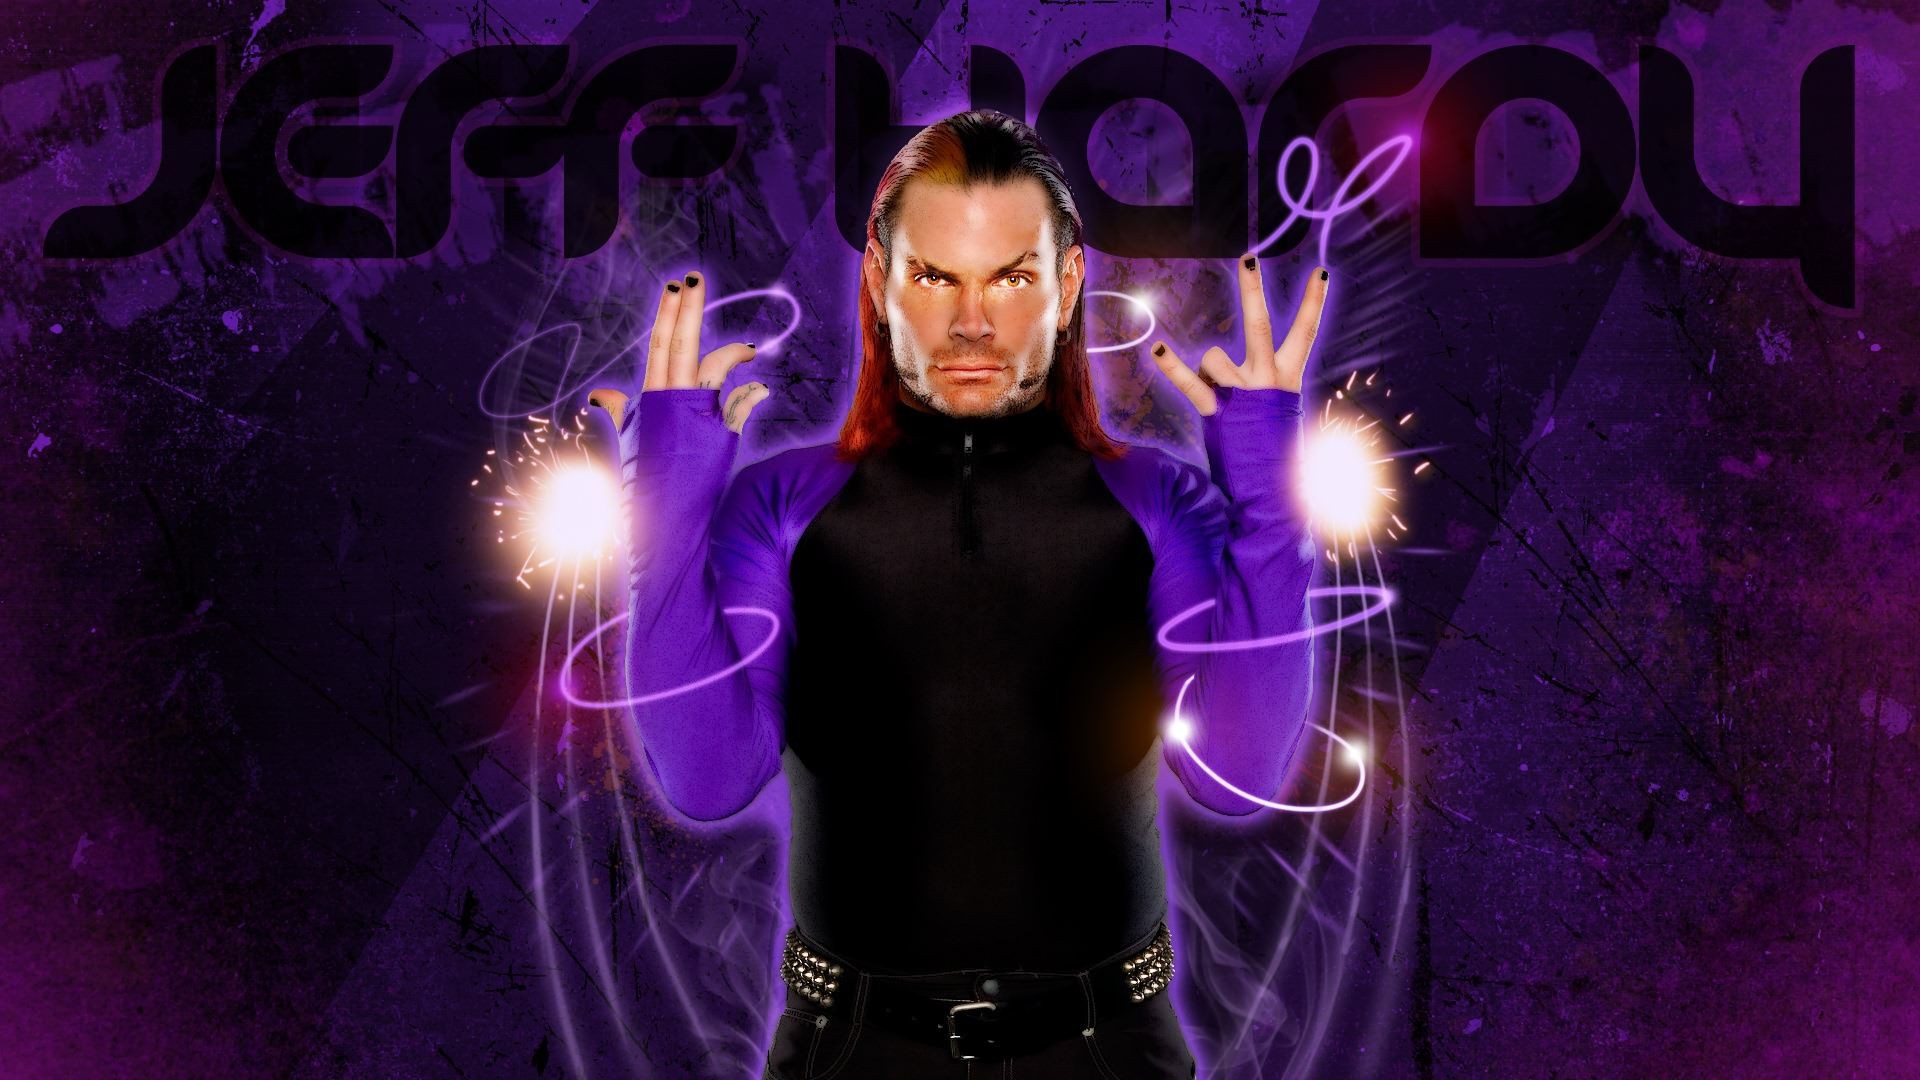 jeff hardy wallpaper,violet,purple,graphic design,fictional character,electric blue